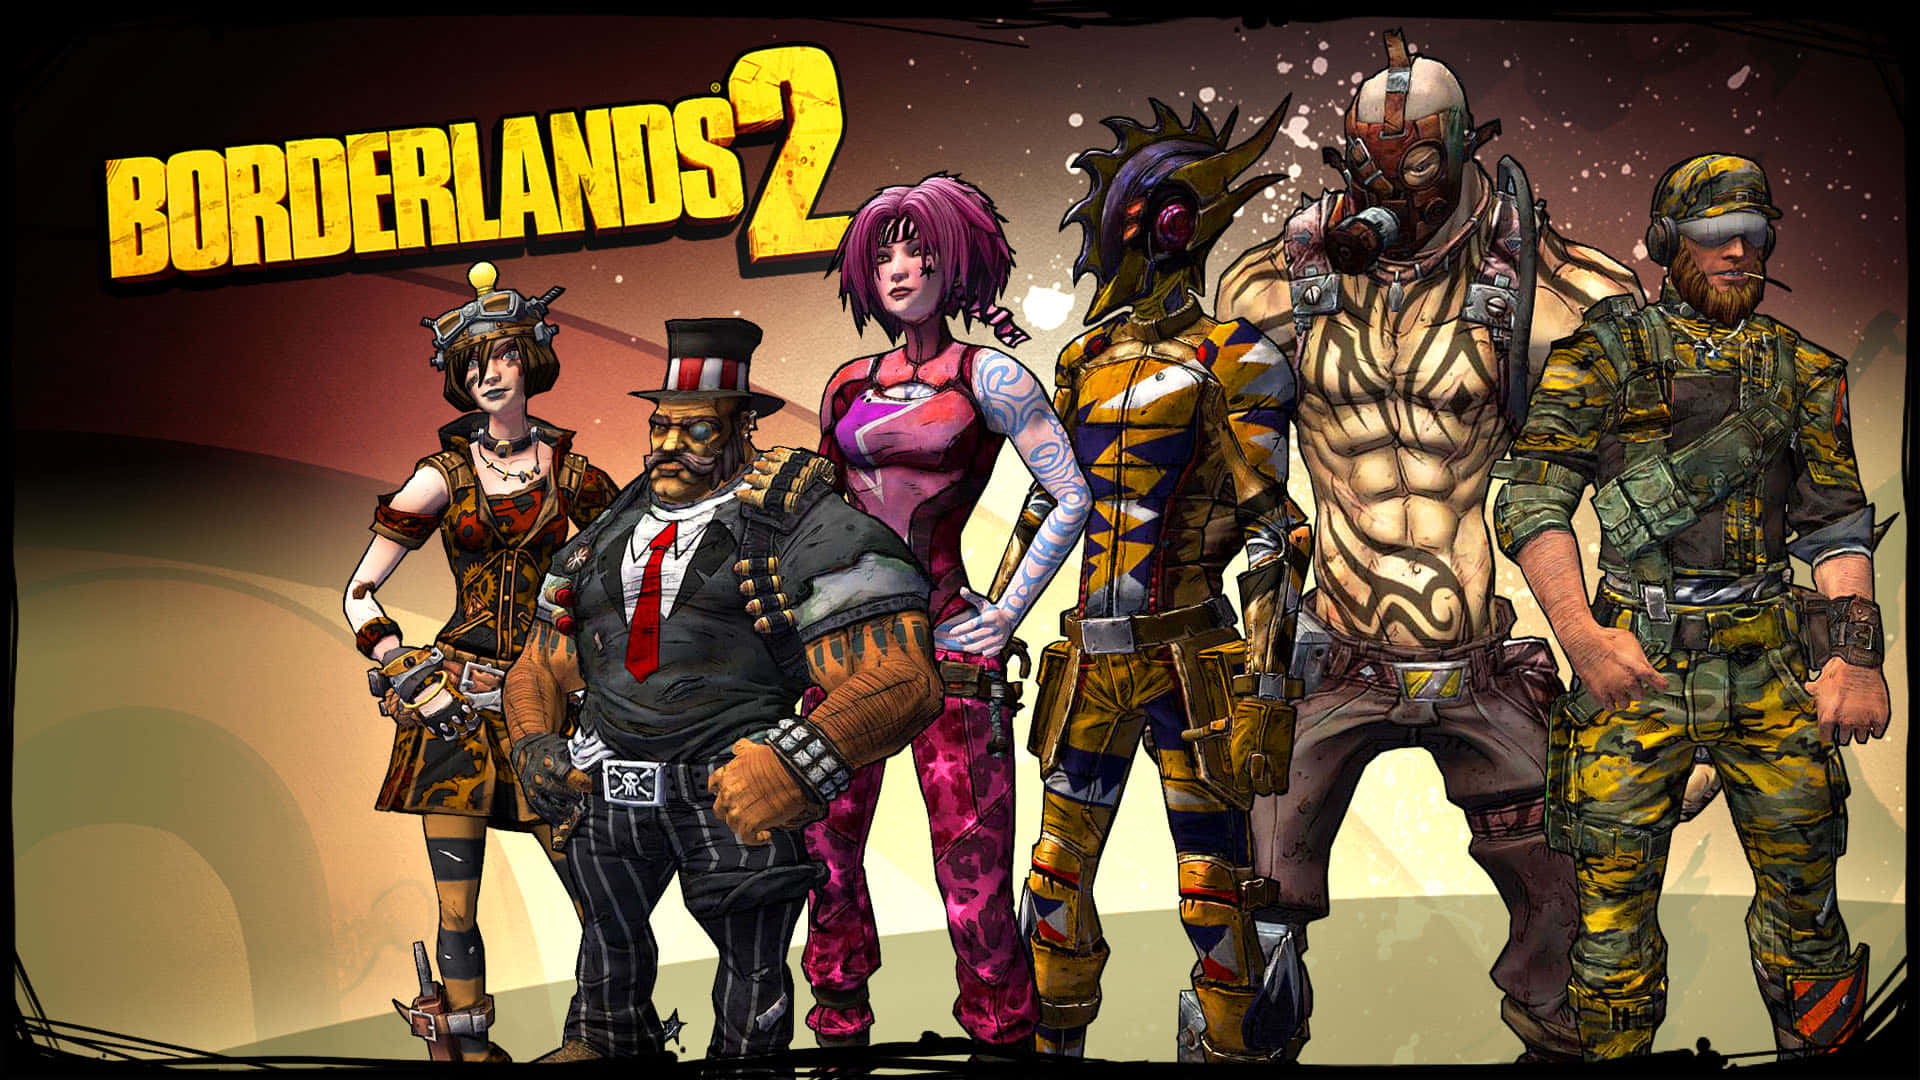 Epic Action in the World of Borderlands